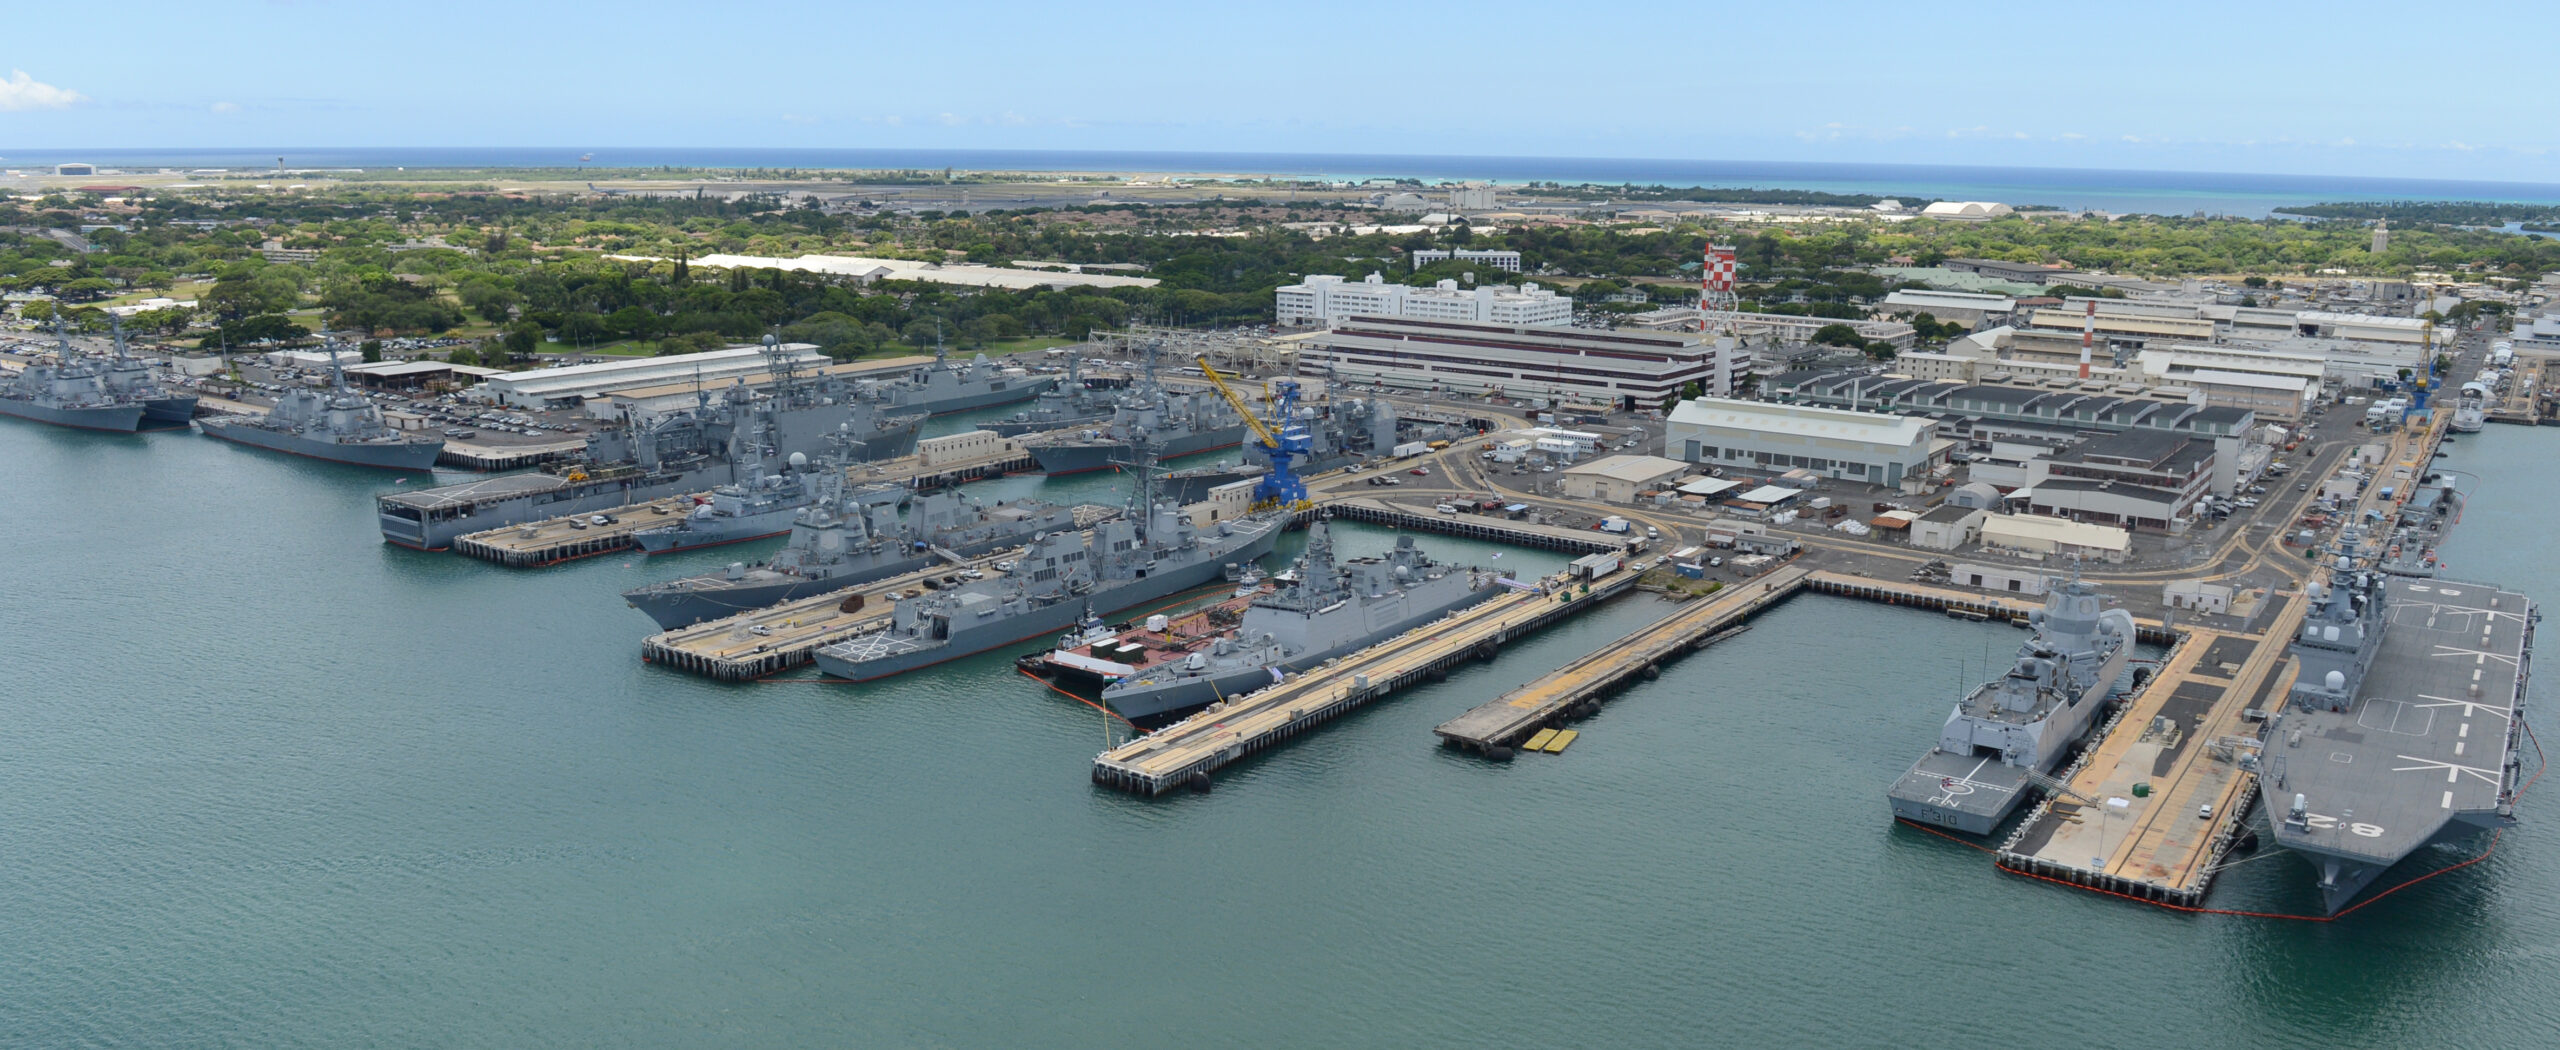 An aerial view of ships moored at Joint Base Pearl Harbor-Hickam during Rim of the Pacific (RIMPAC) Exercise 2014. The world's largest international maritime exercise, RIMPAC provides a unique training opportunity that helps participants foster and sustain the cooperative relationships that are critical to ensuring the safety of sea lanes and security on the world's oceans. Twenty-two nations, more than 49 ships, six submarines, more than 200 aircraft and 25,000 personnel are participating in RIMPAC. (U.S. Navy photo by Mass Communication Specialist 1st Class Shannon E. Renfroe/Released)